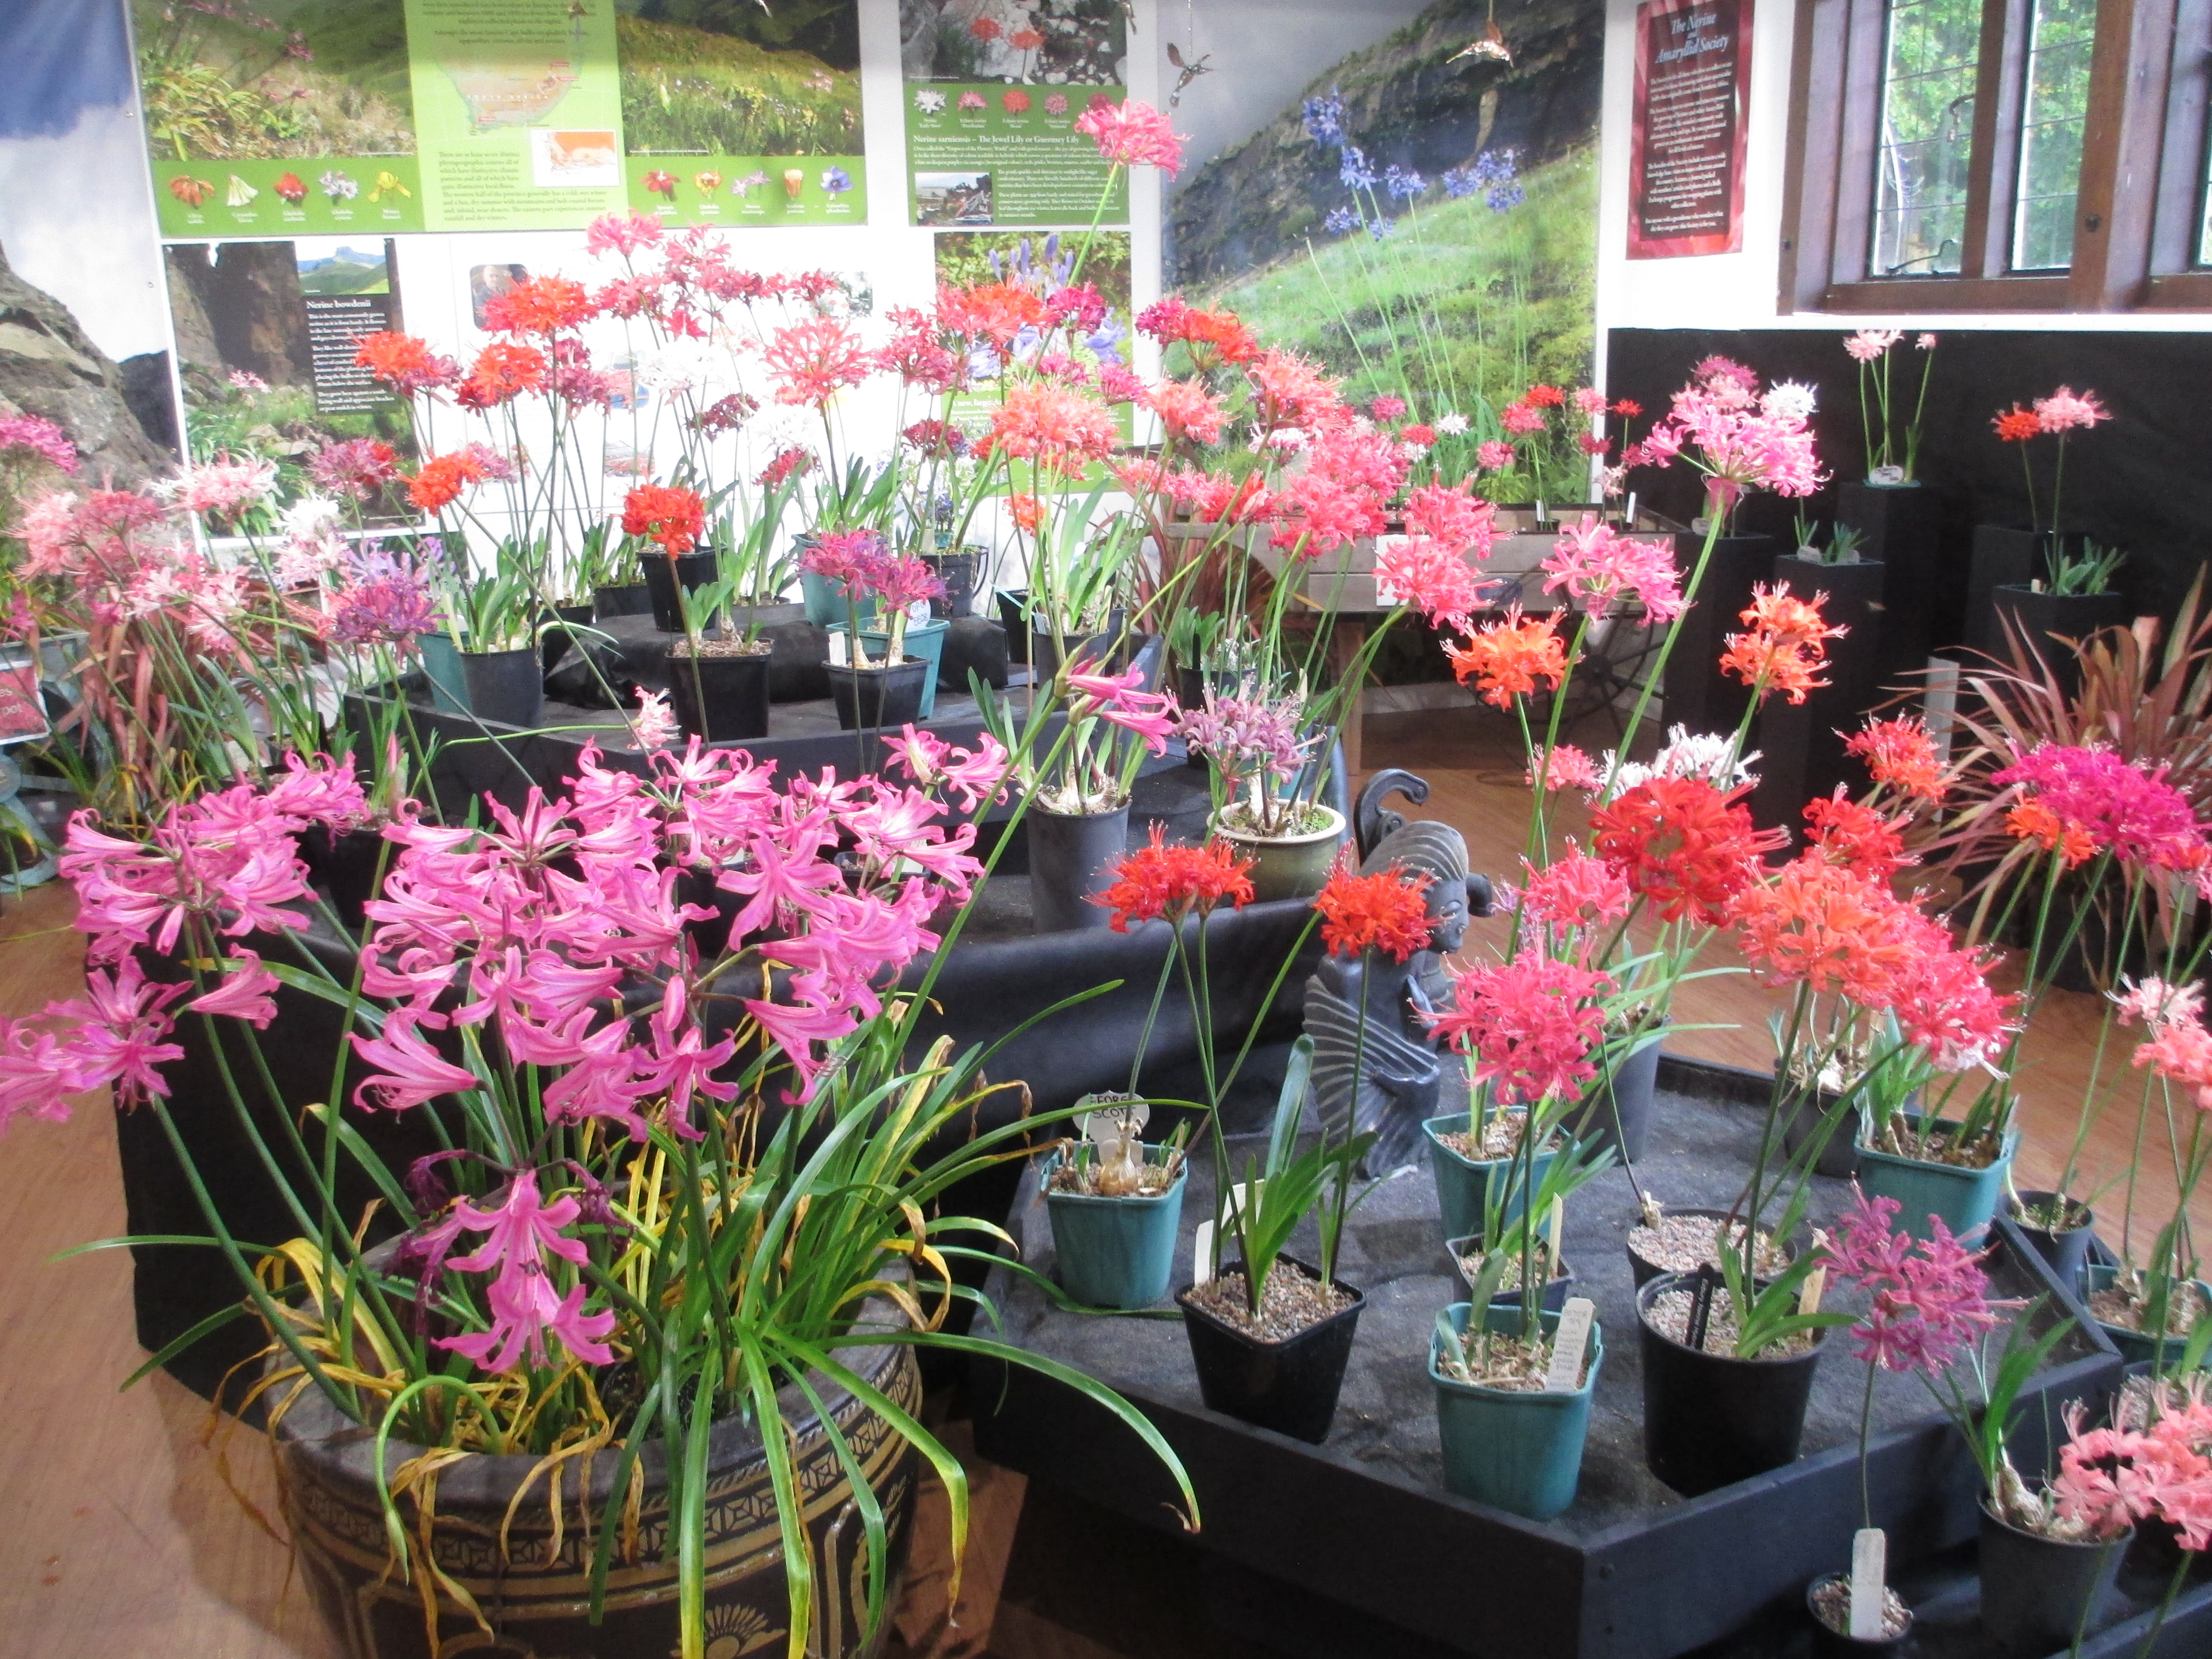 The display included Hardy Nerines (l. foreground) as well as Nerine Sarniensis.